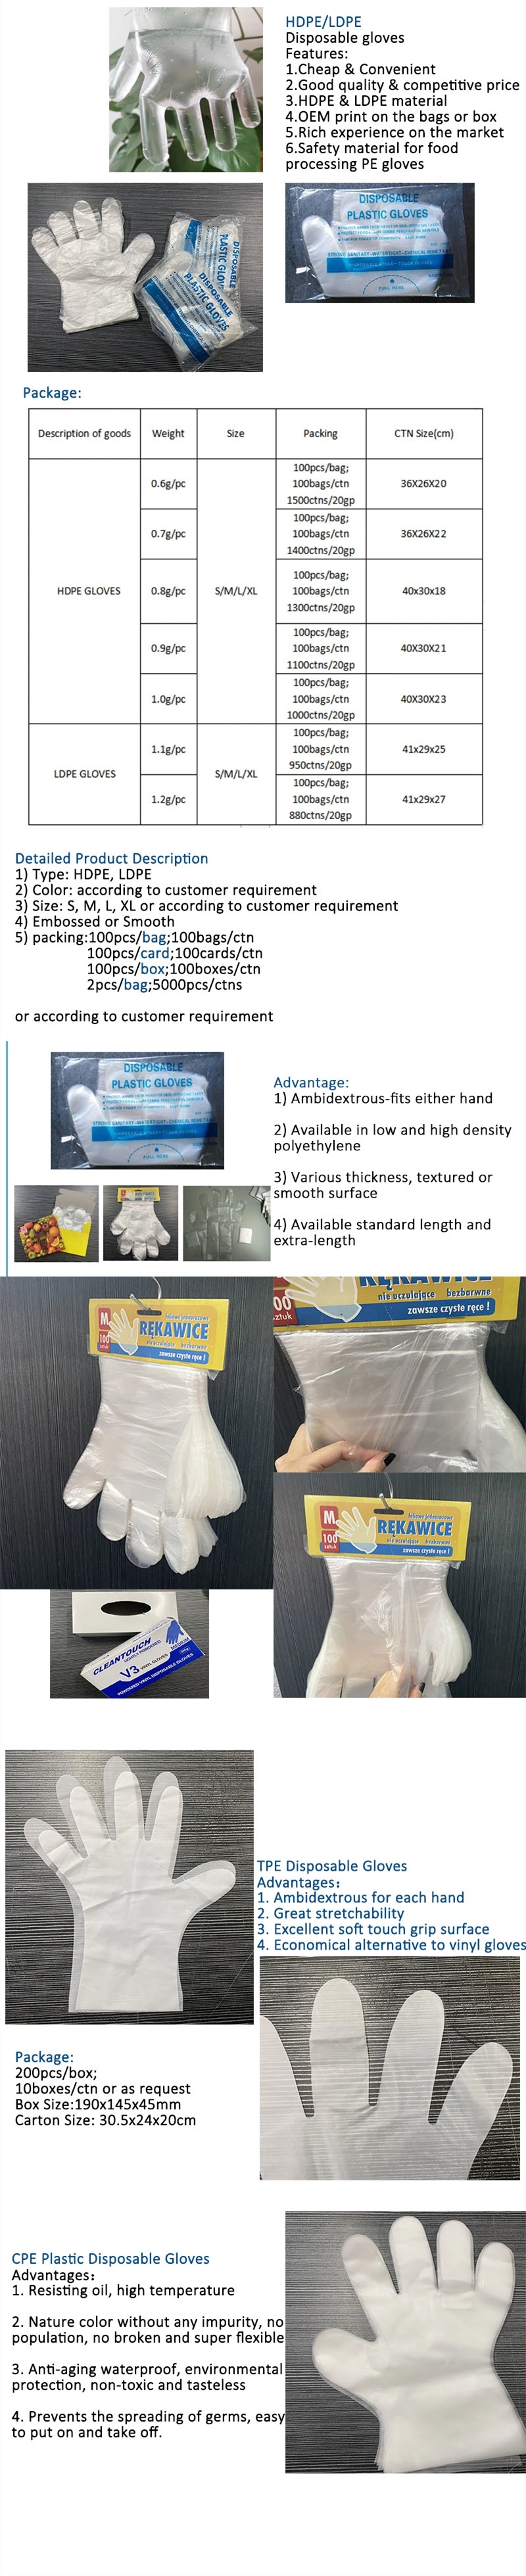 Transparent Disposable PE Gloves for Food Service, Restaurant, Hotels, Kitchen, Cleaning